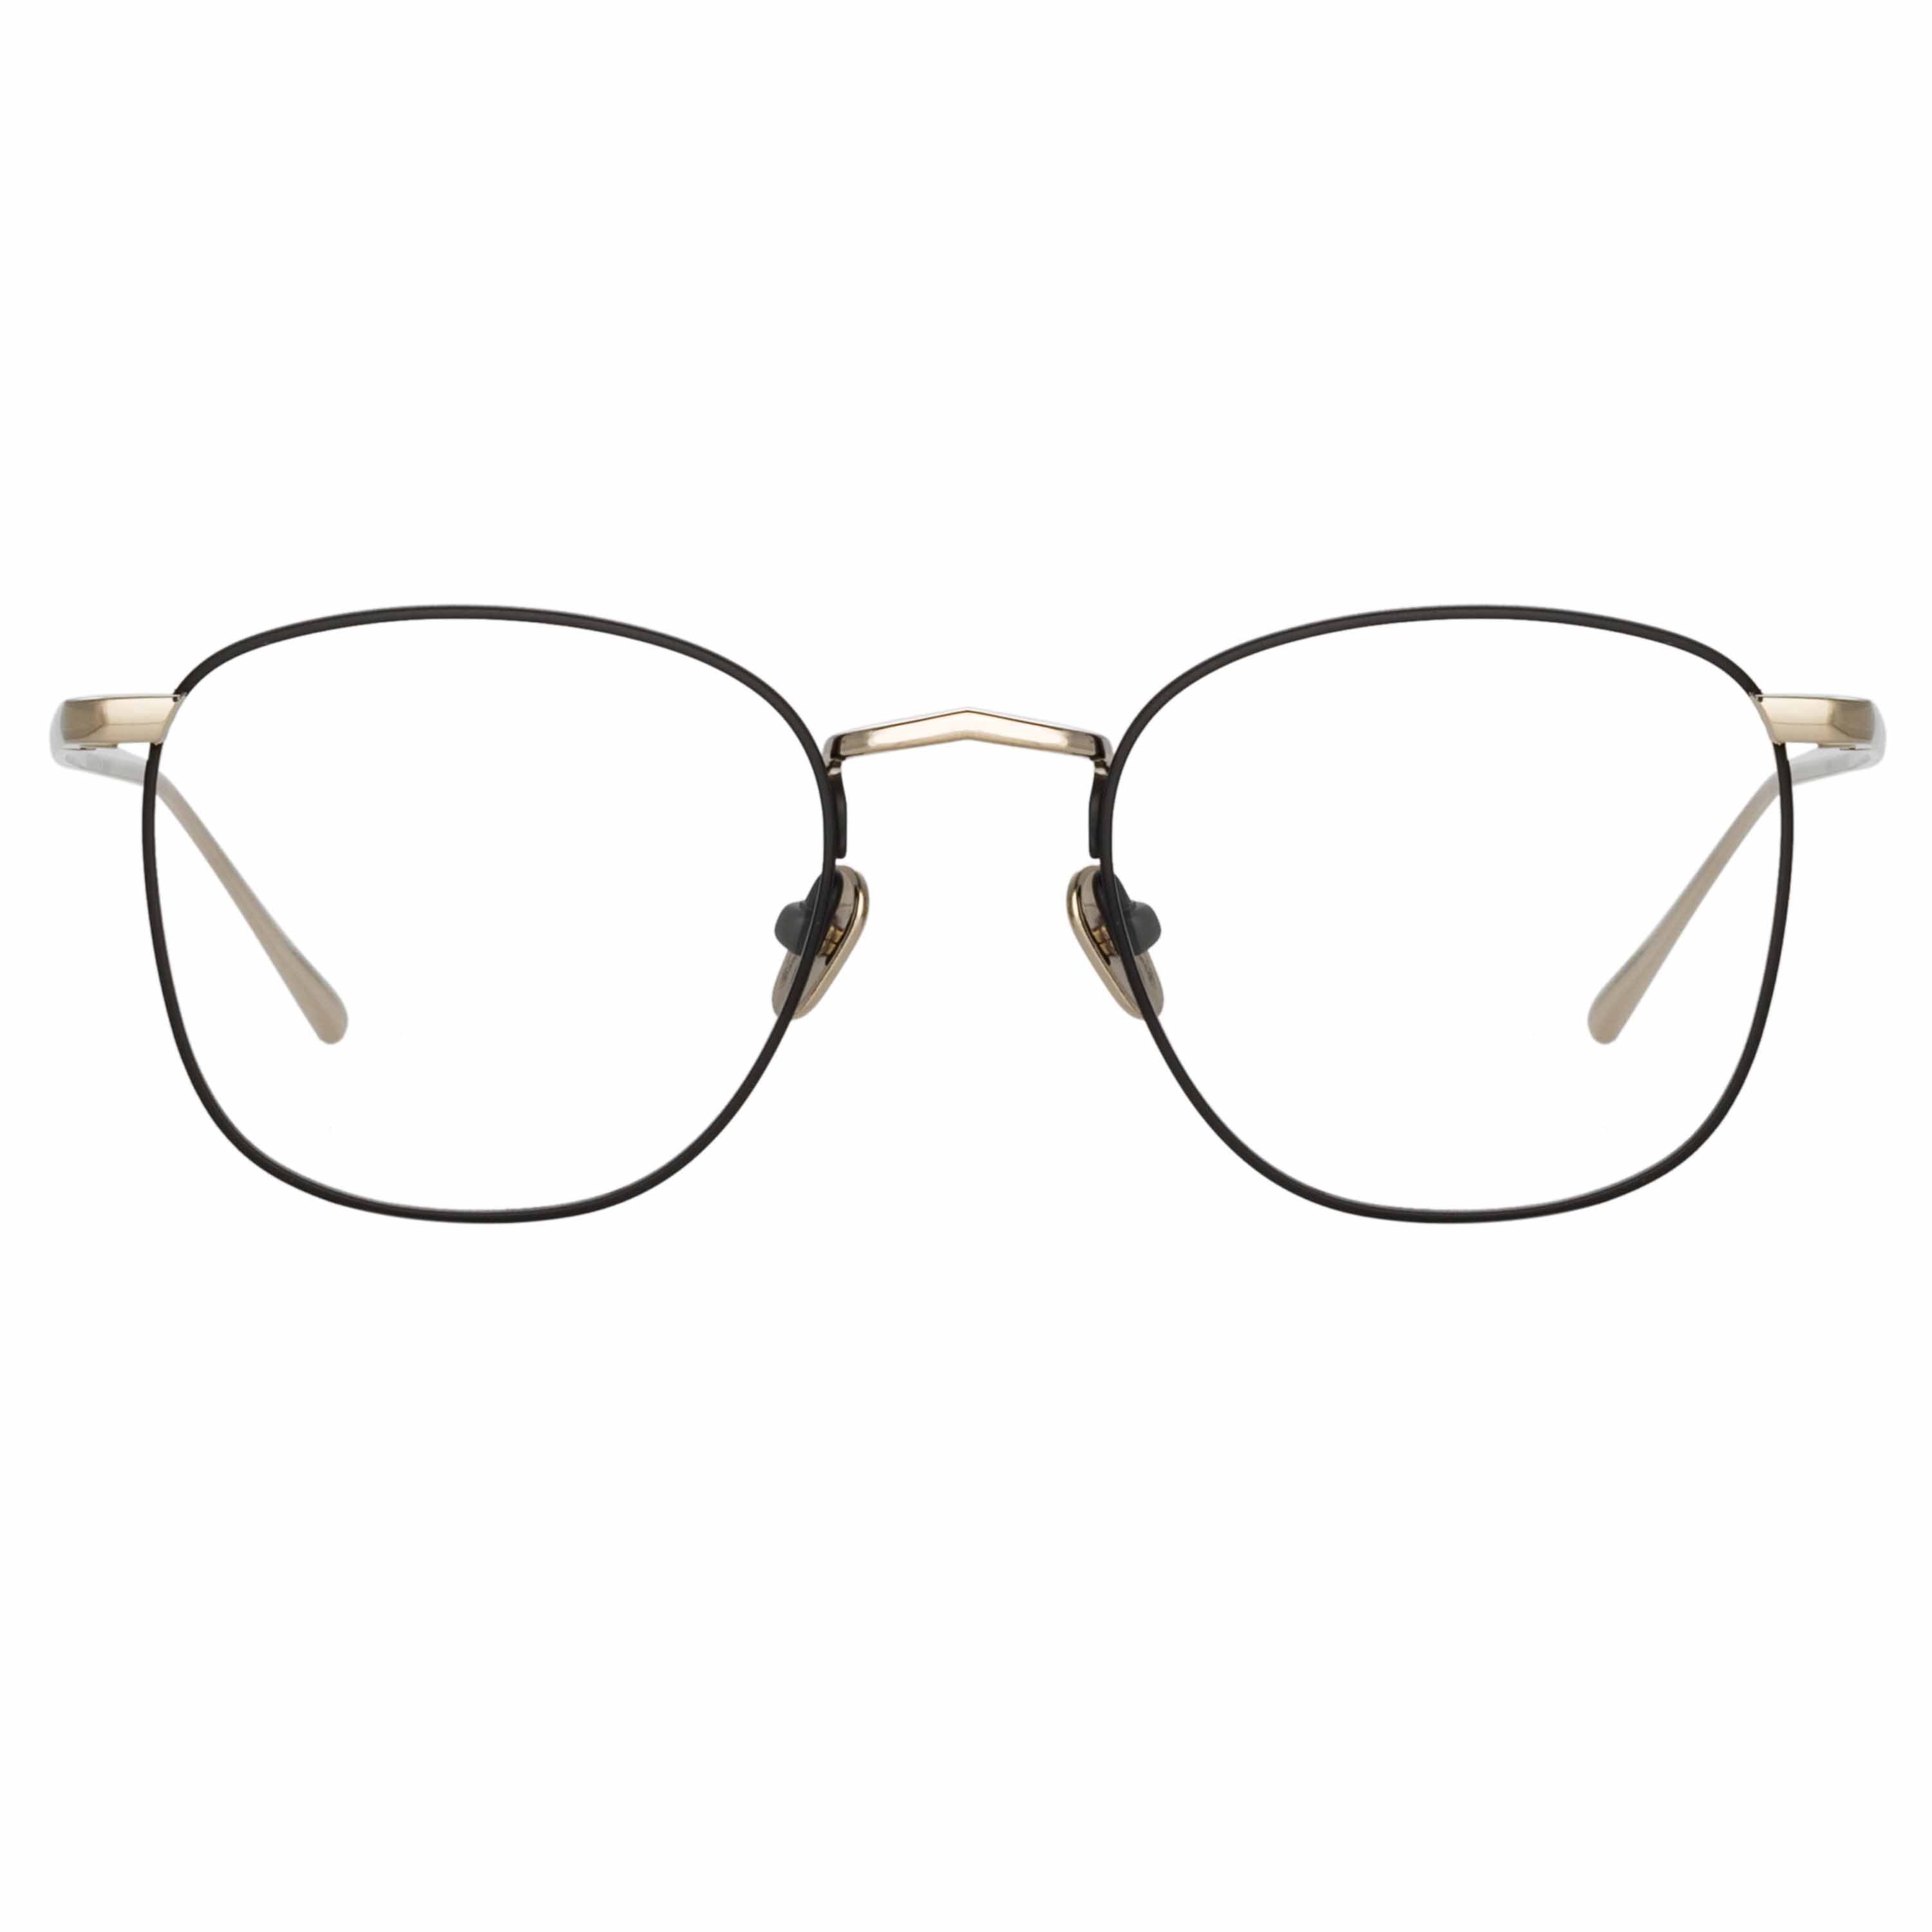 Square Optical Frame in Light Gold and Black (C20)